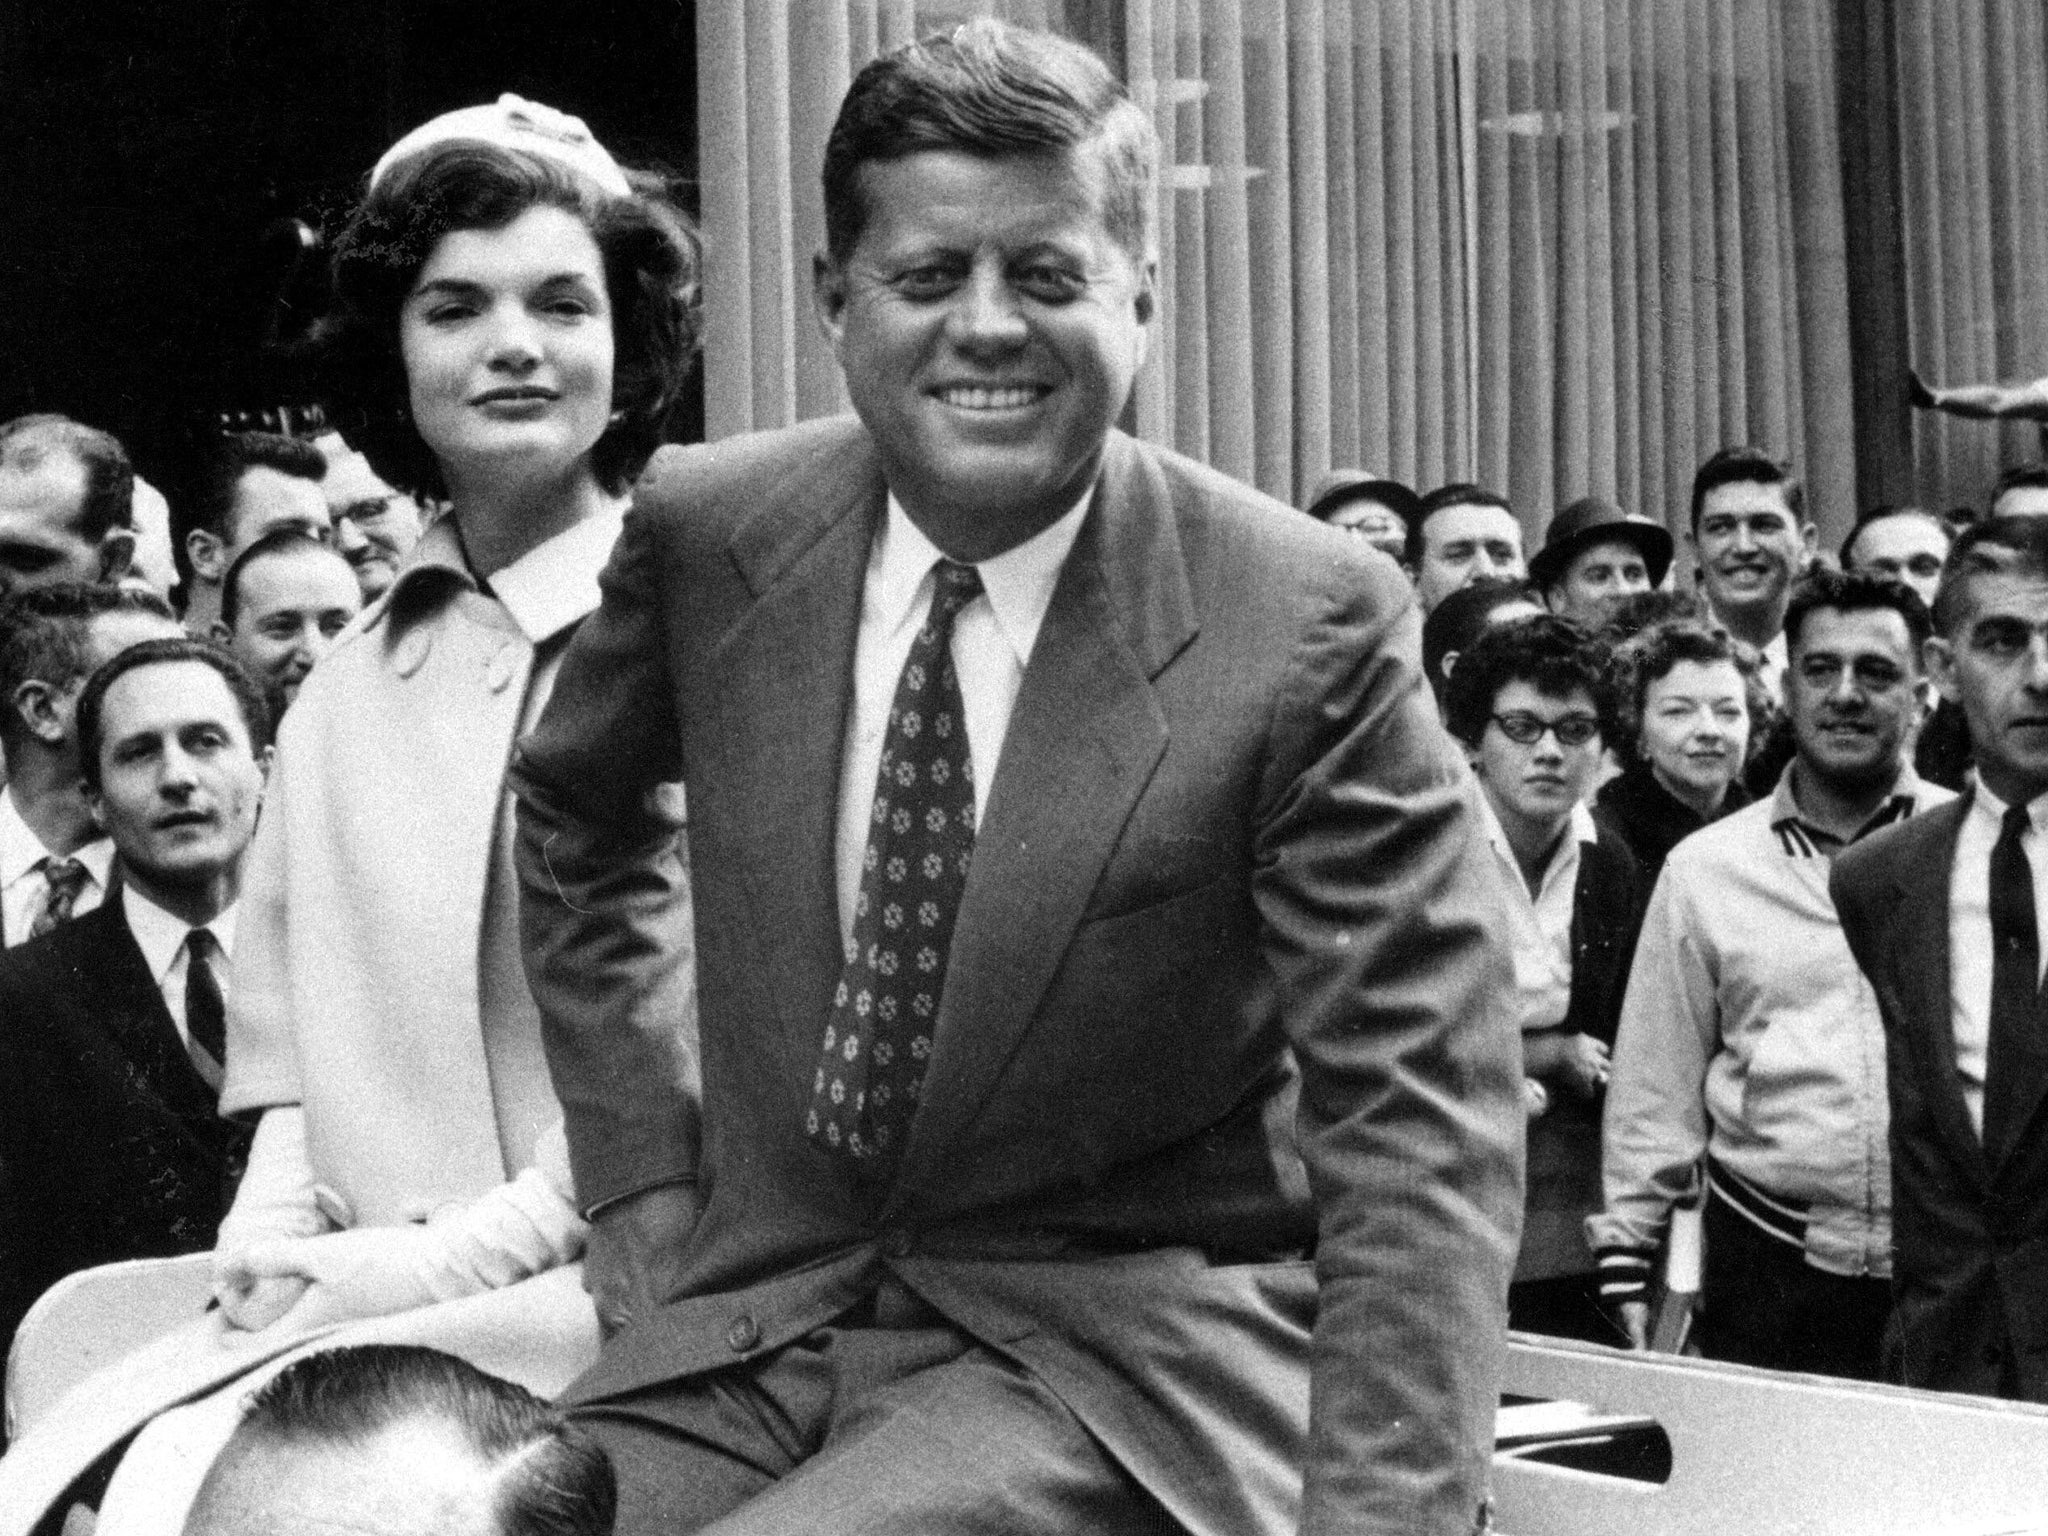 Biographers of John F Kennedy have said his wife Jackie often turned a blind eye to his incessant cheating